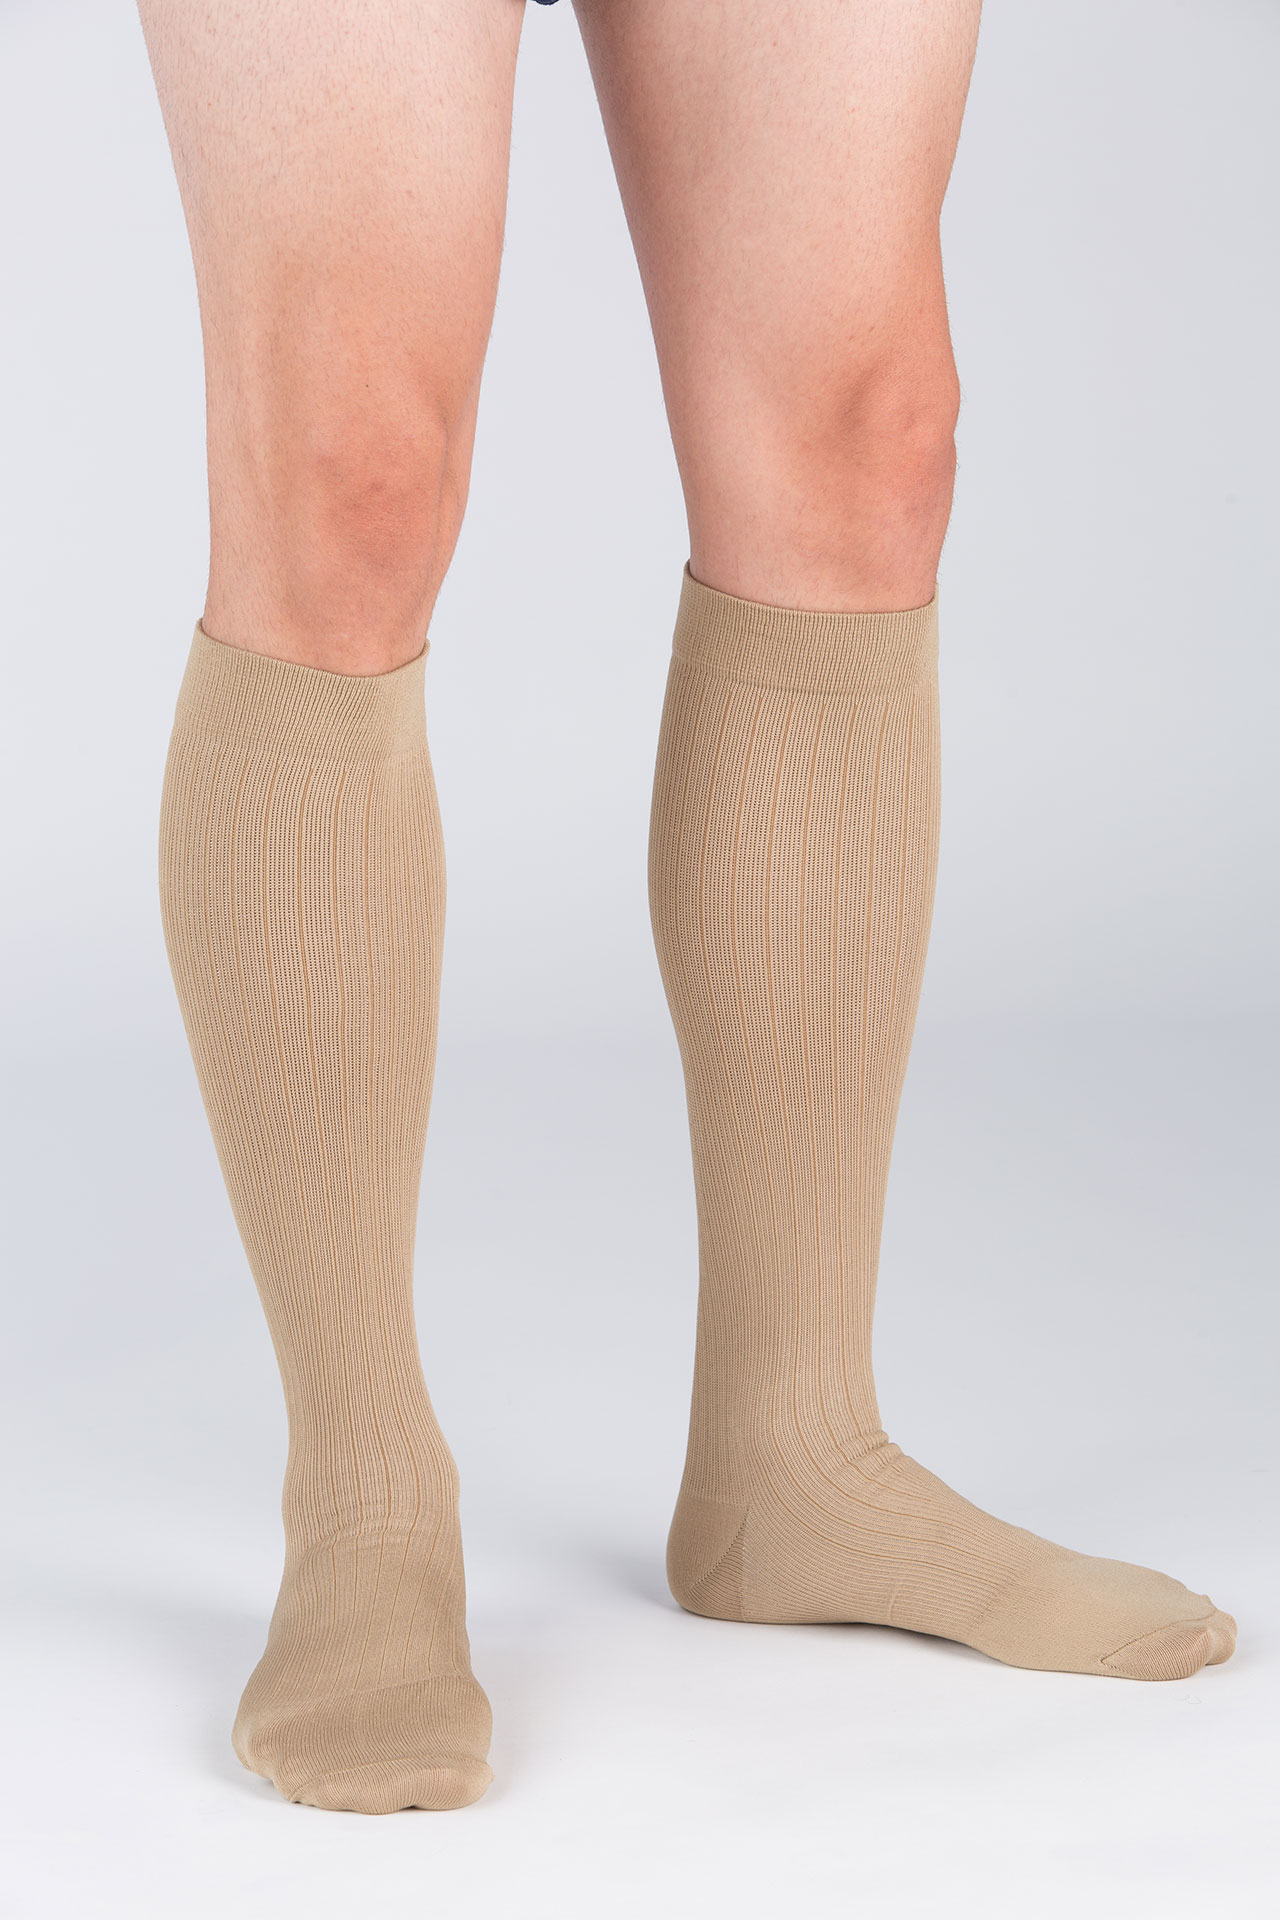 Elastic Slip-On Calf Support - Everfit Healthcare Australia Largest  Equipment SuperStore! Quality and Savings!